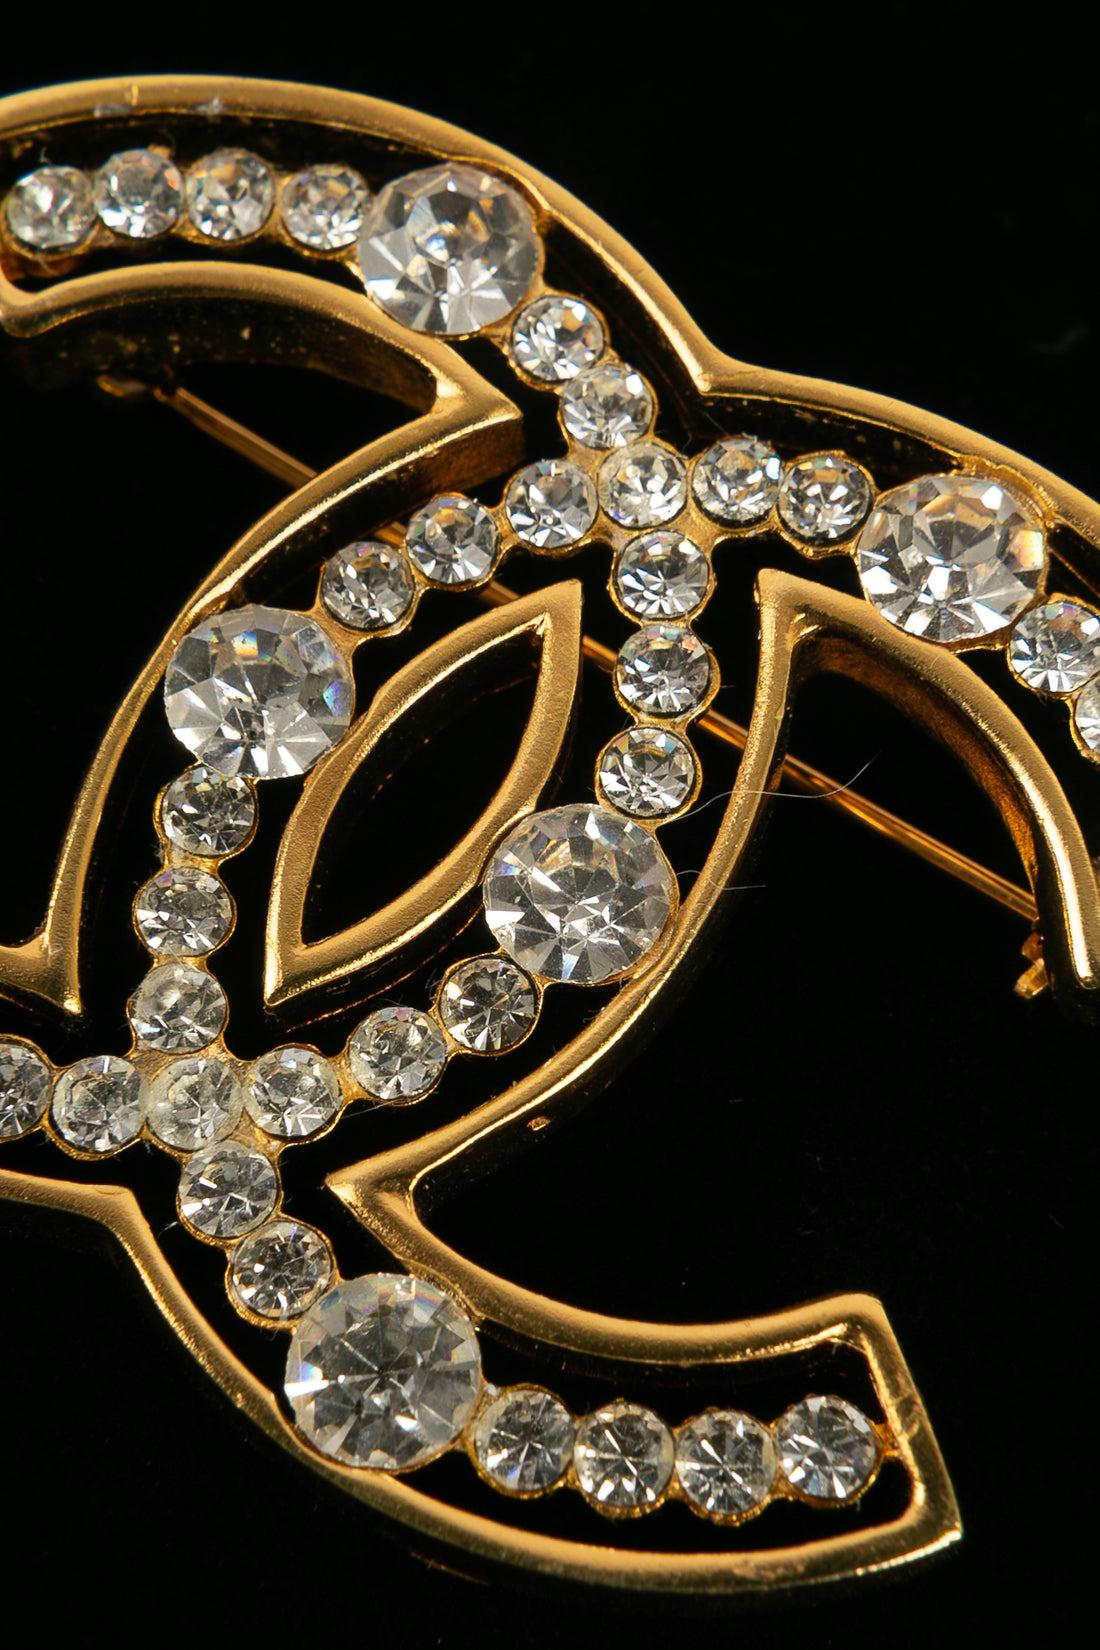 Chanel -  (Made in France) CC brooch in gold-plated metal paved with Swarovski rhinestones. Fall-Winter 2002 Collection.

Additional information:
Condition: Very good condition
Dimensions: 3.8 cm x 5 cm
Period: 21st Century

Seller Reference: BRB58